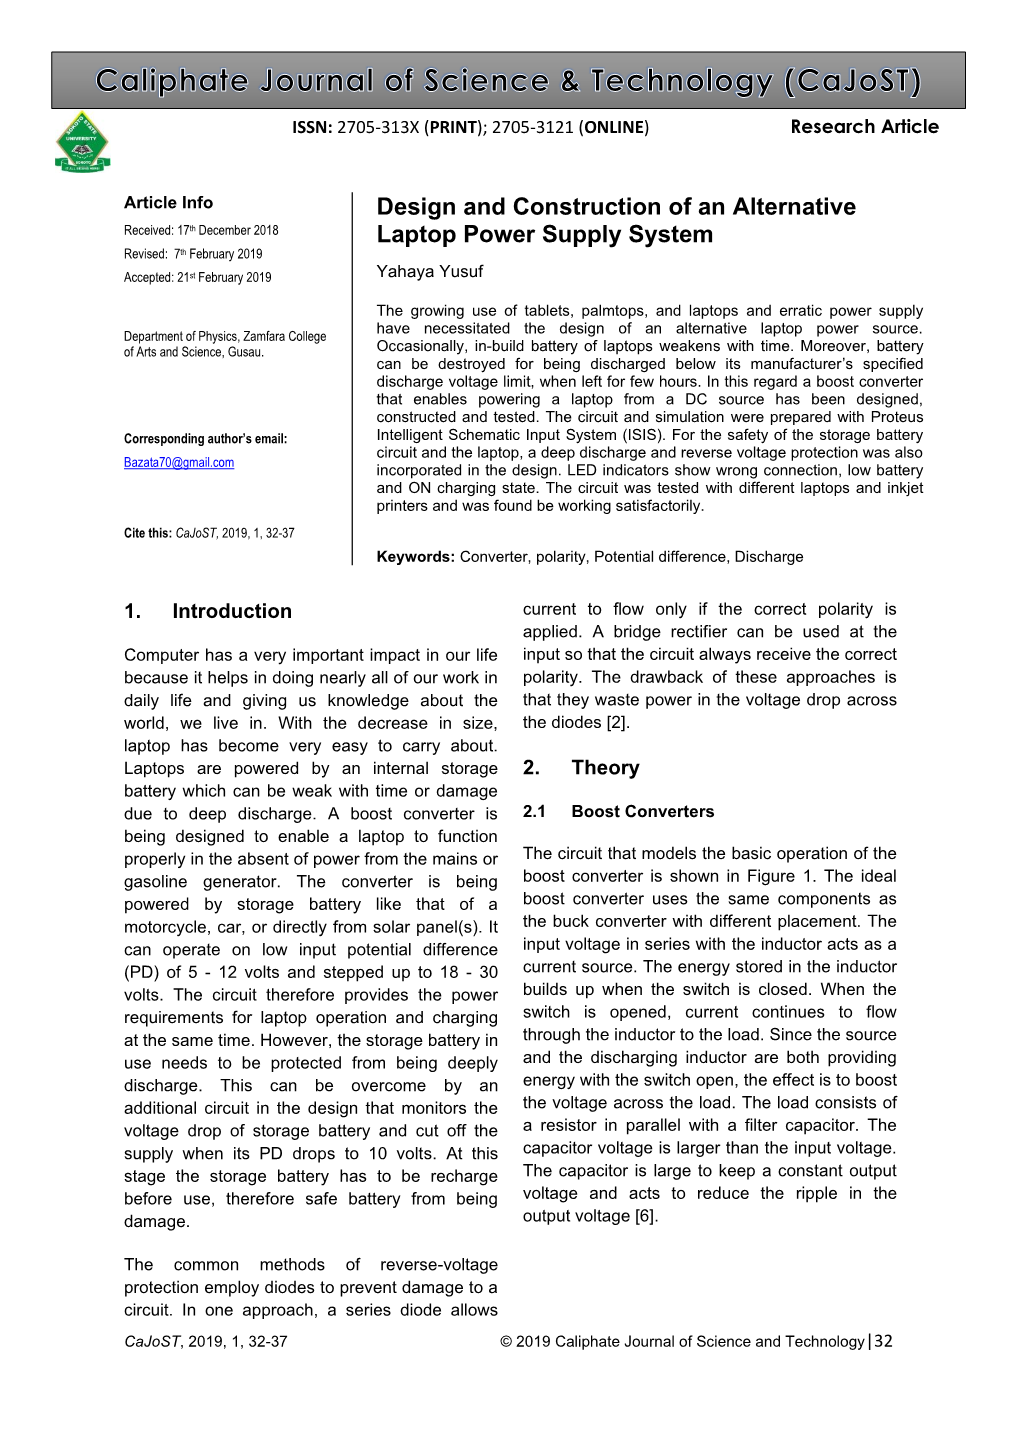 Design and Construction of an Alternative Laptop Power Supply System Full Paper